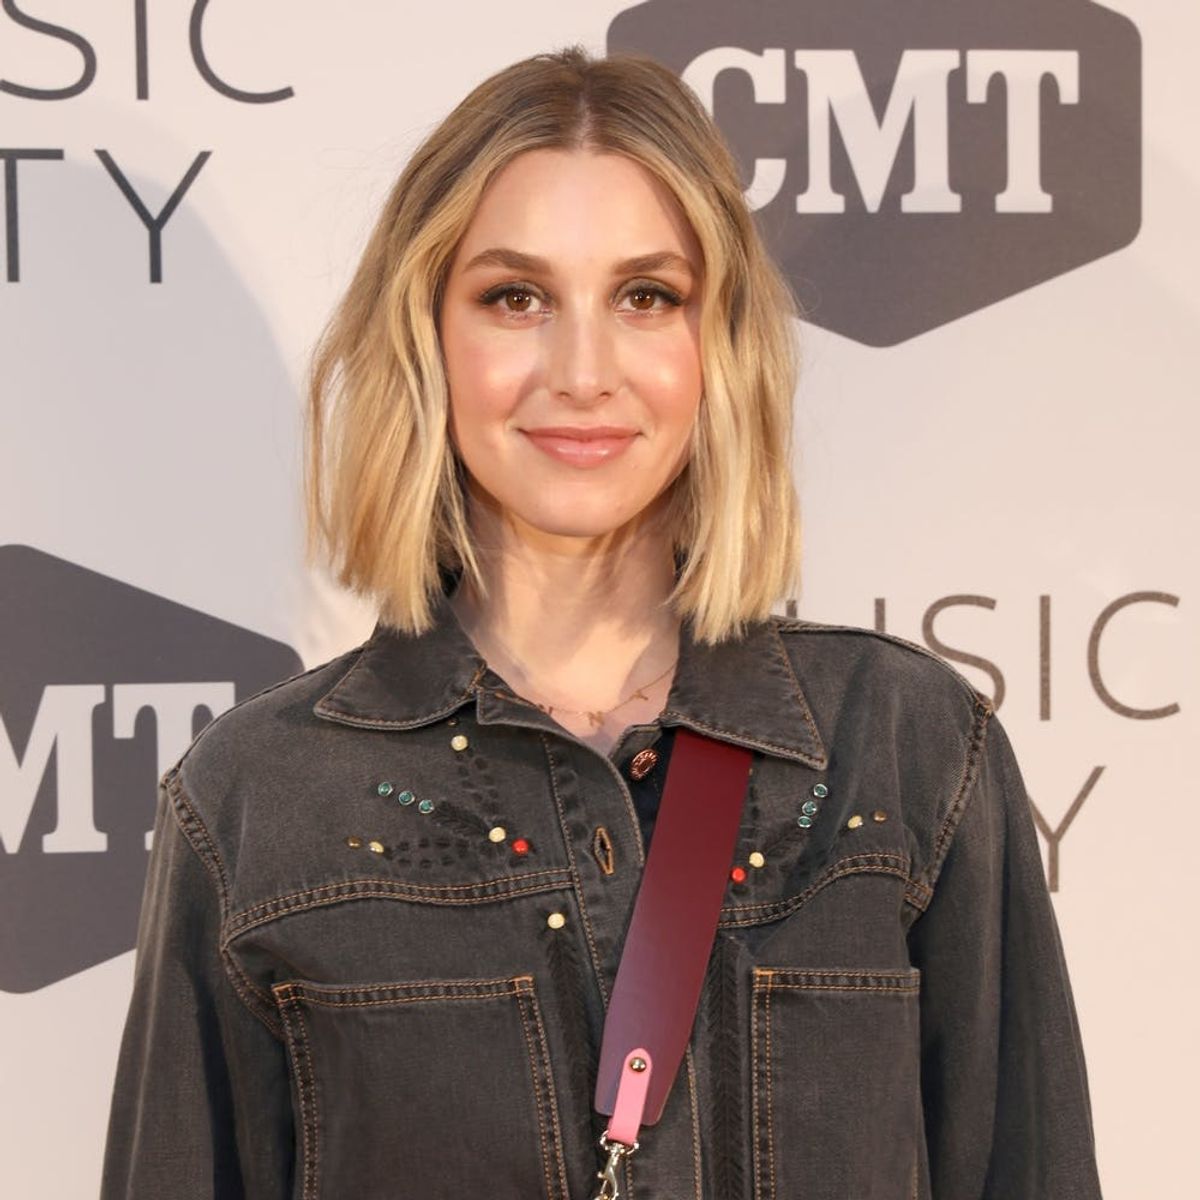 Whitney Port Is Officially Joining MTV’s ‘The Hills’ Reboot!